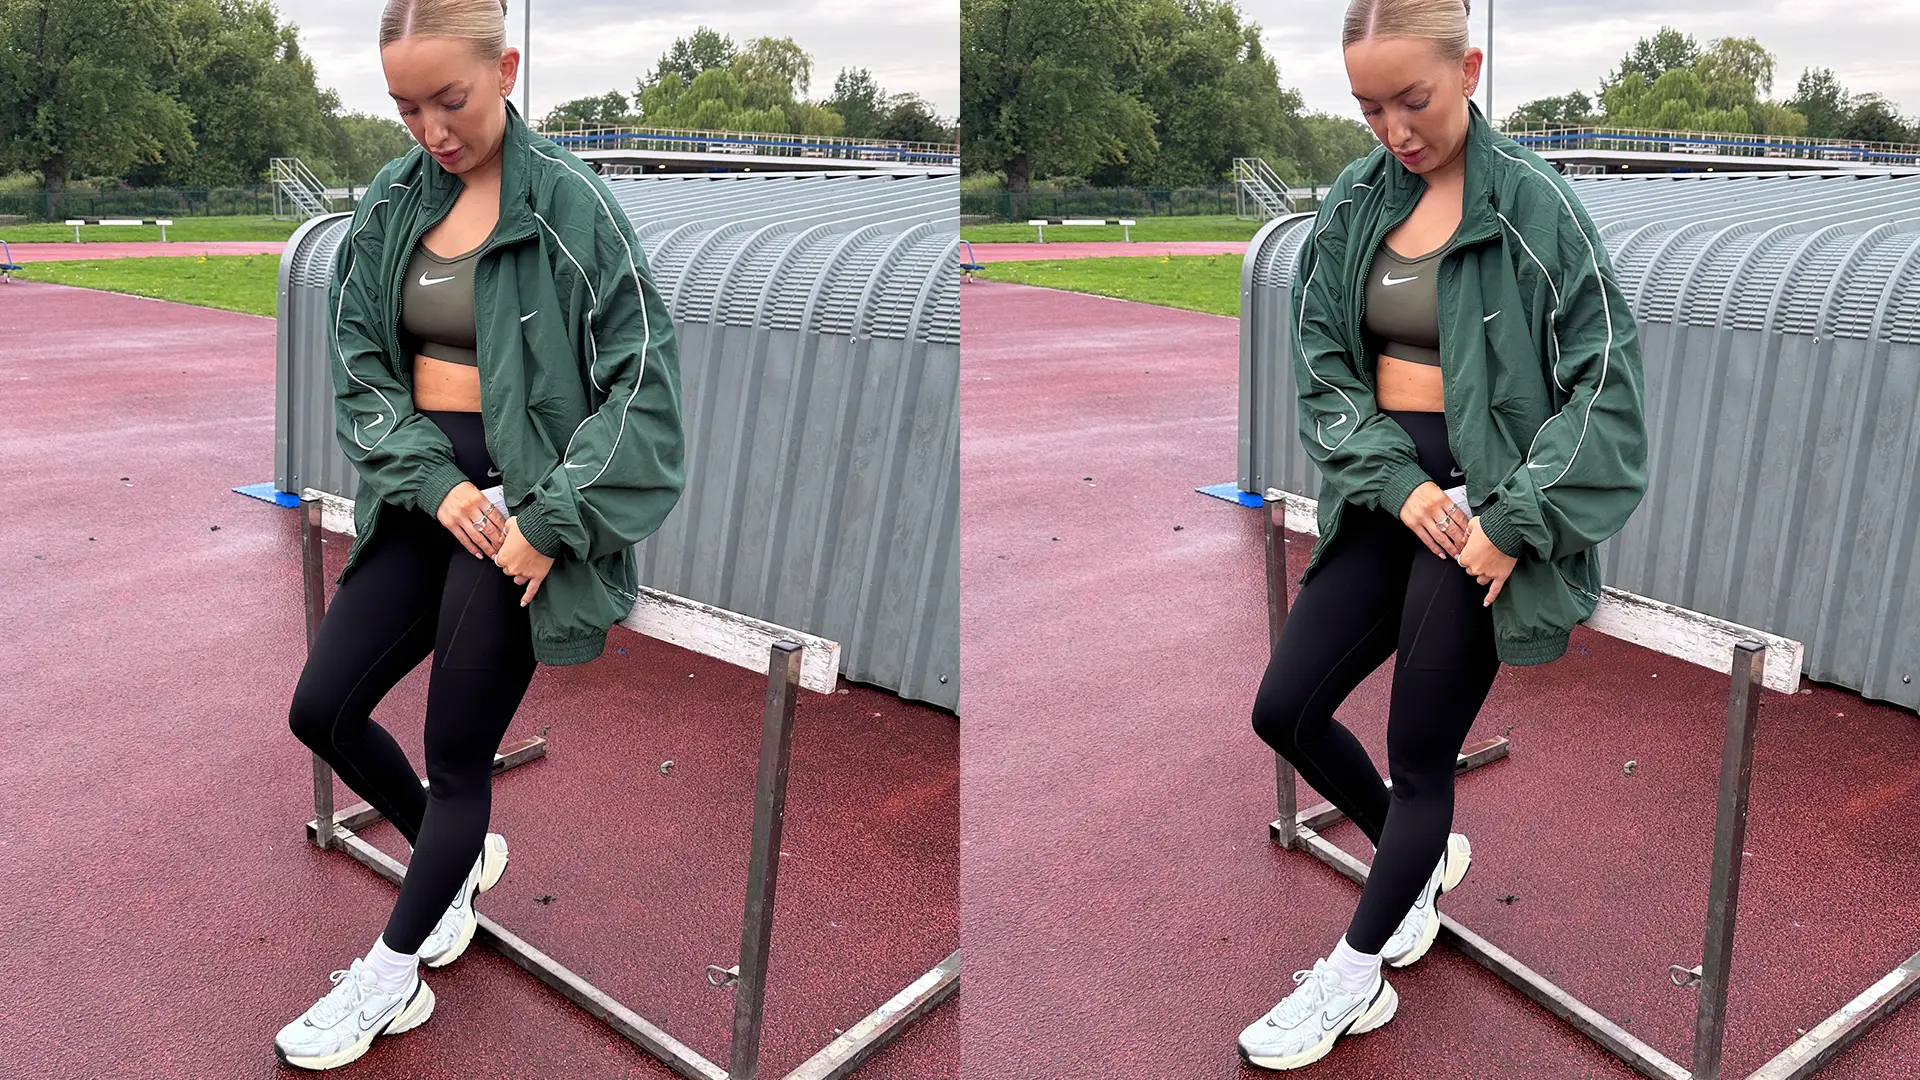 Nike Just Created the Perfect Leggings - And Yes, They Have Pockets